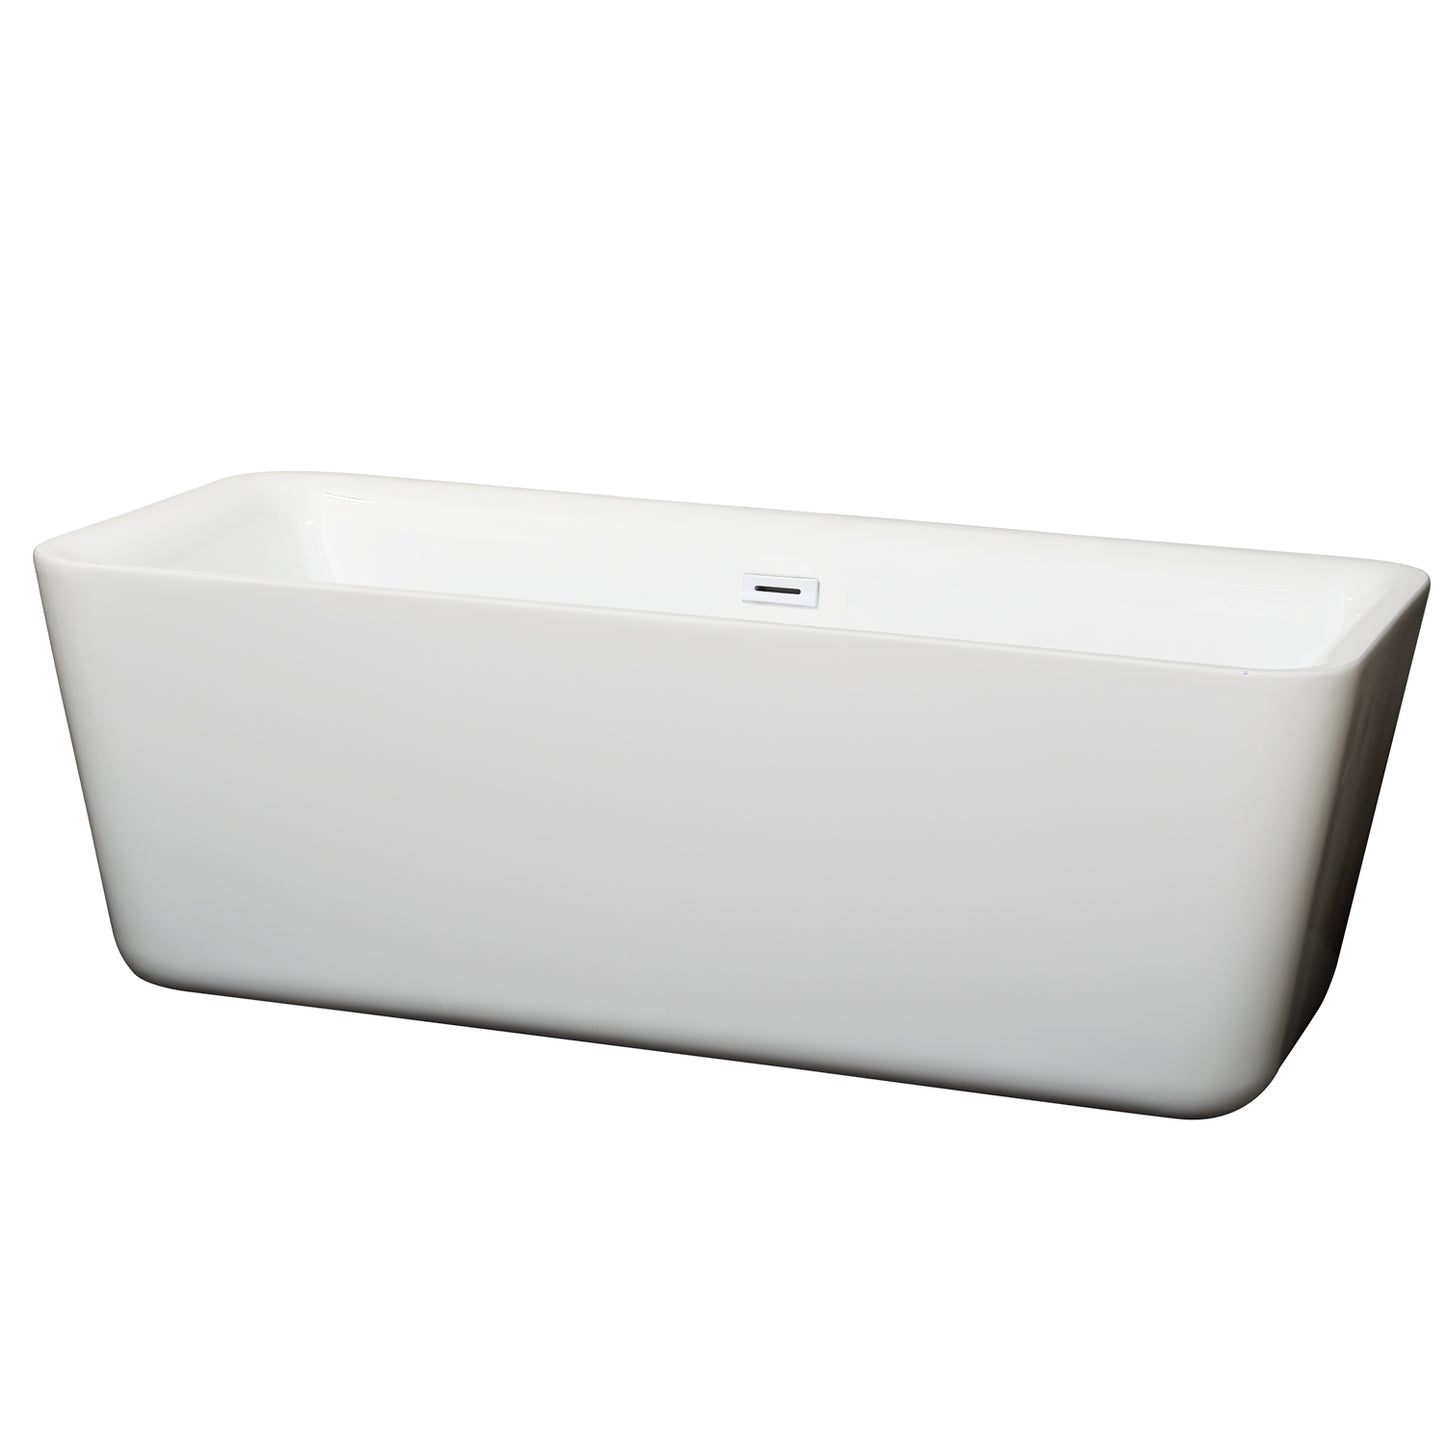 Wyndham Collection Emily 69 Inch Freestanding Bathtub in White with Shiny White Drain and Overflow Trim - Luxe Bathroom Vanities